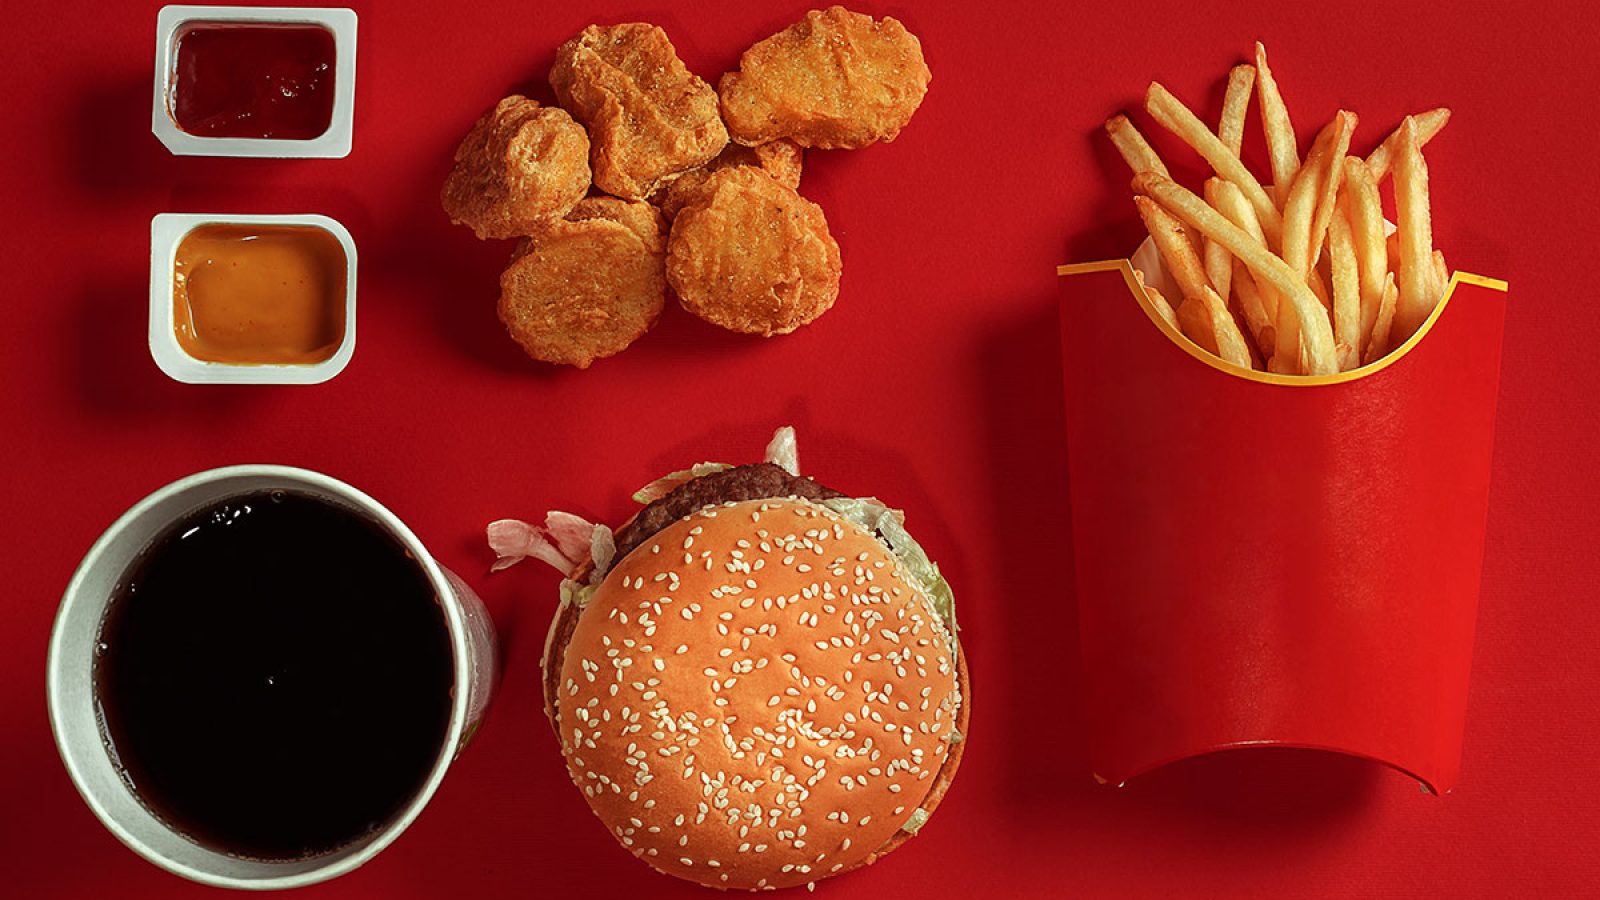 Dangerous Side Effects of Eating Fast Food Every Day, According to ...